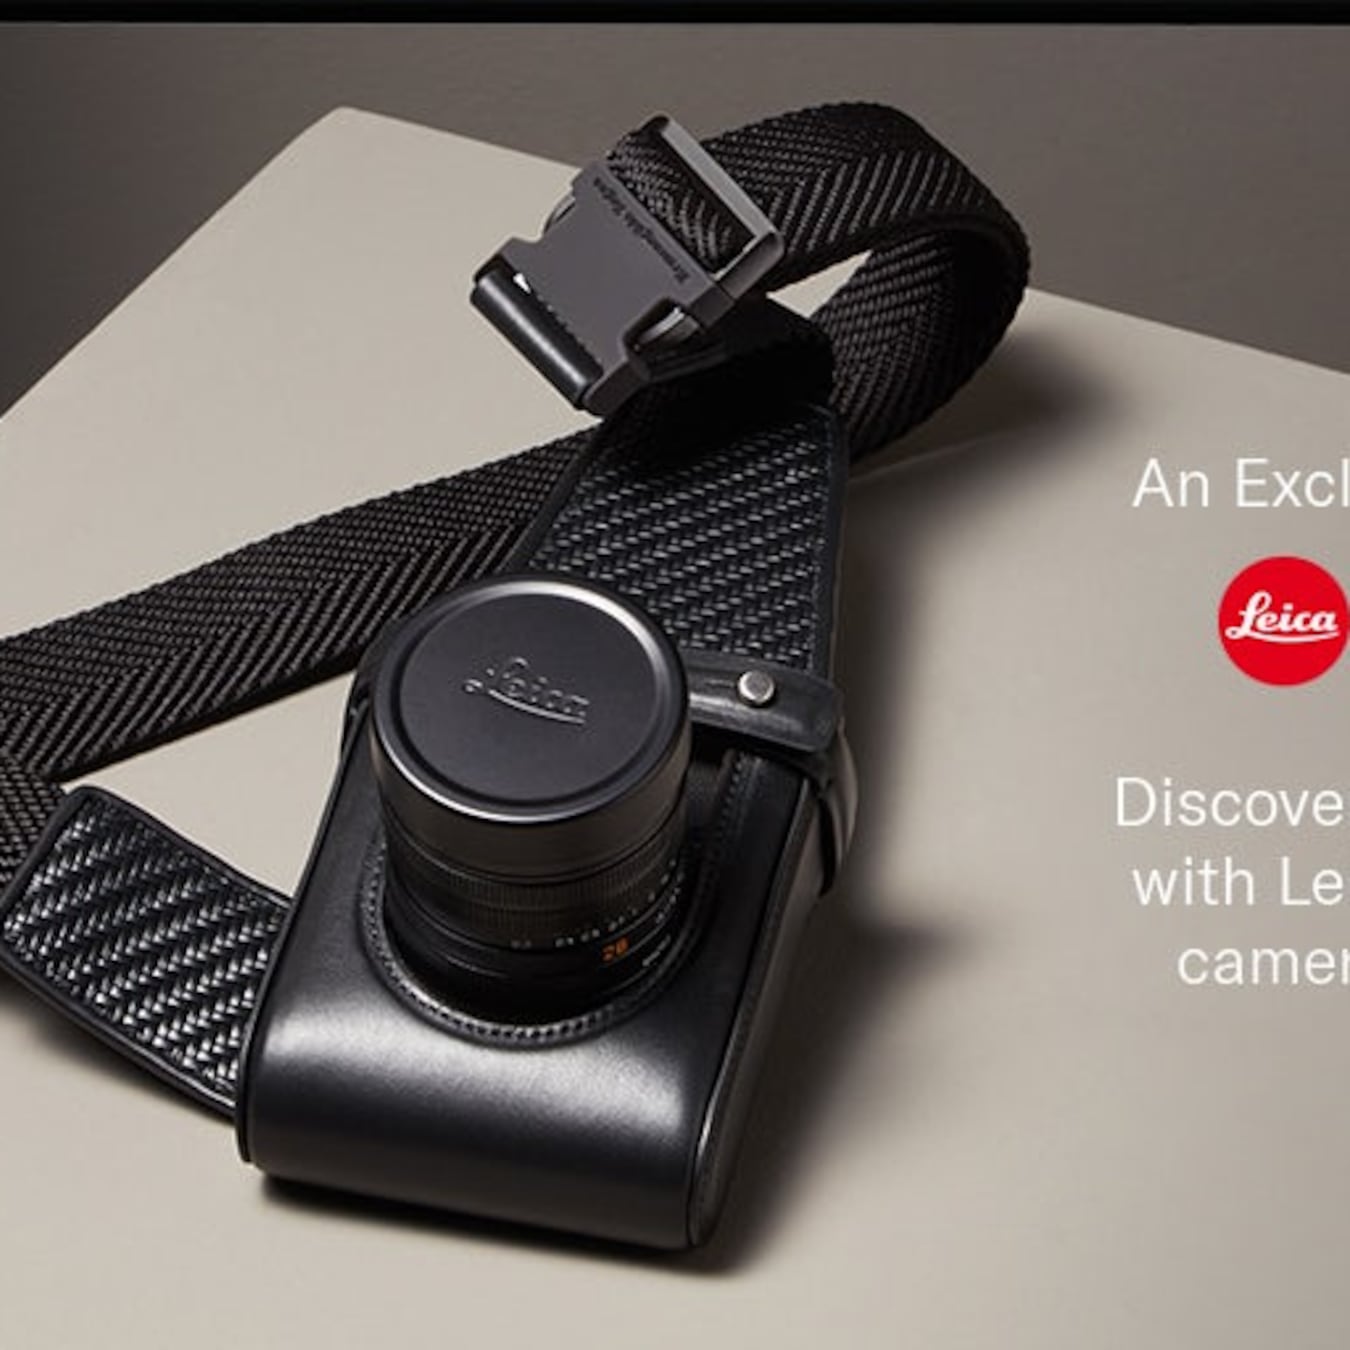 Project-Zegna and Leica: a creative collaboration